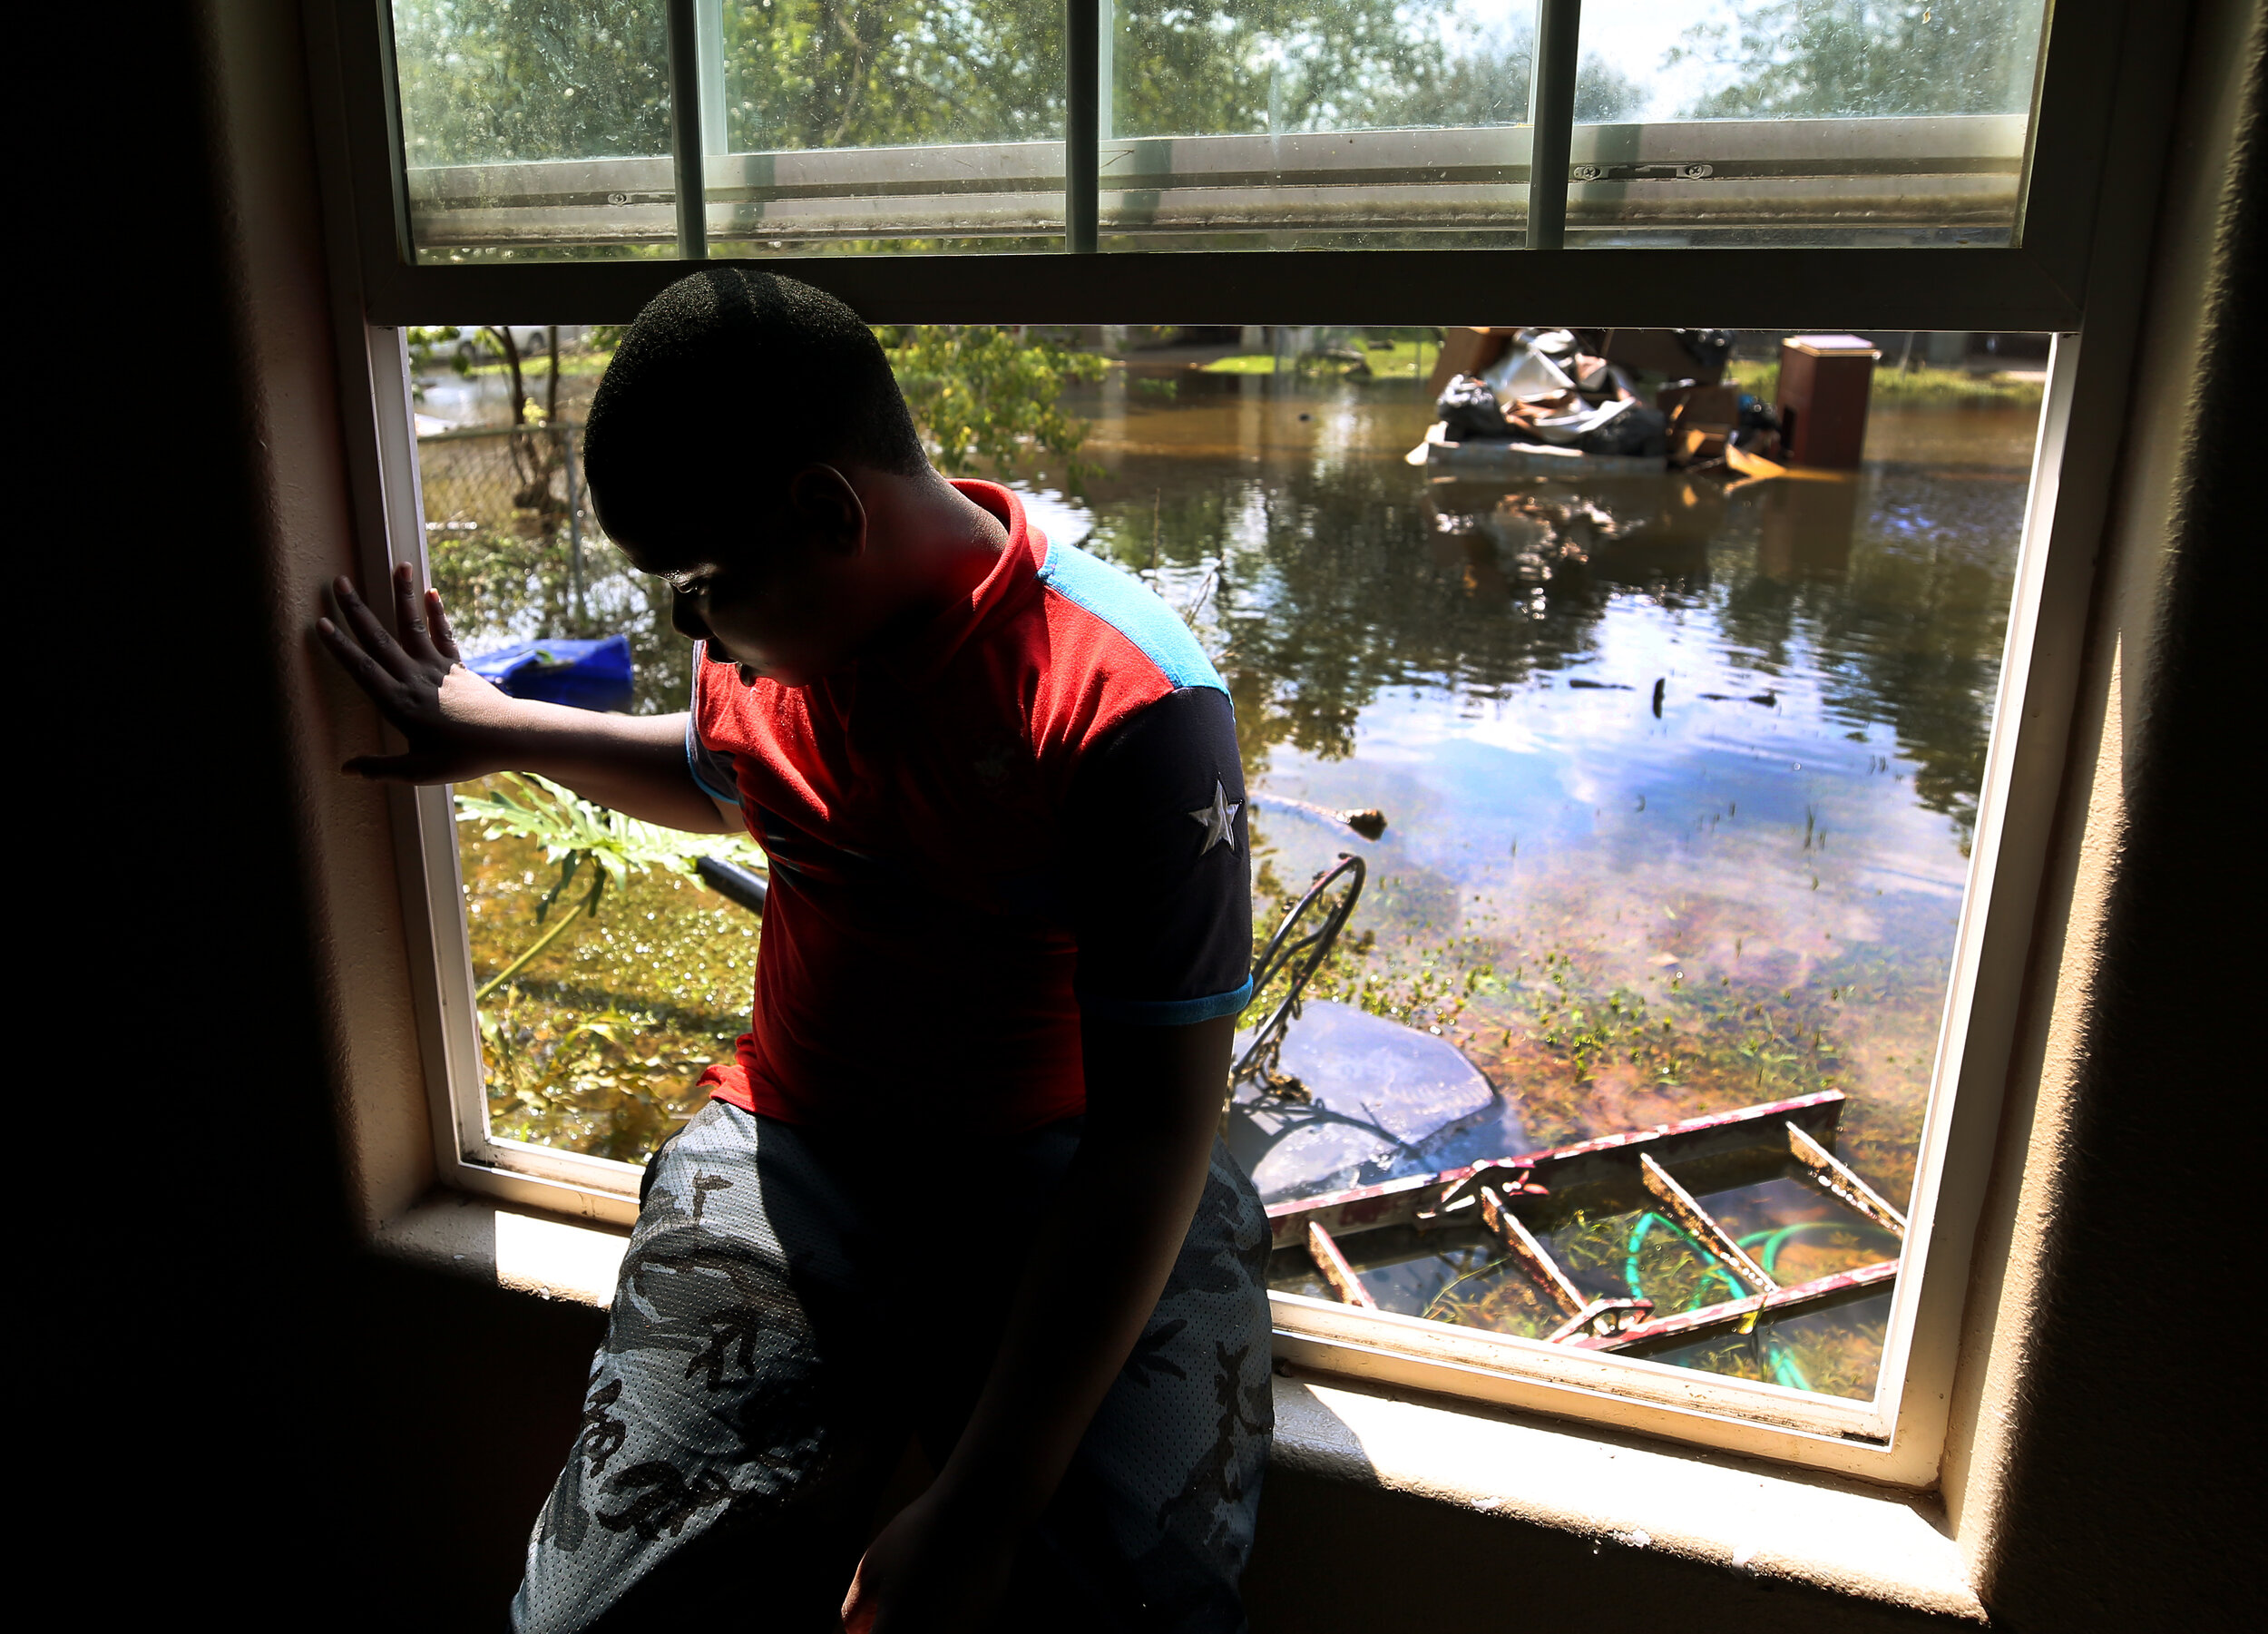  London Robinson, 9, sits on the windowsill of his room at his grandmother's home as the front yard remained flooded Sunday, Sept. 3, 2017, in Beaumont, Texas. The Robinsons got together to dispose of the destroyed flooring and belongings inside the 